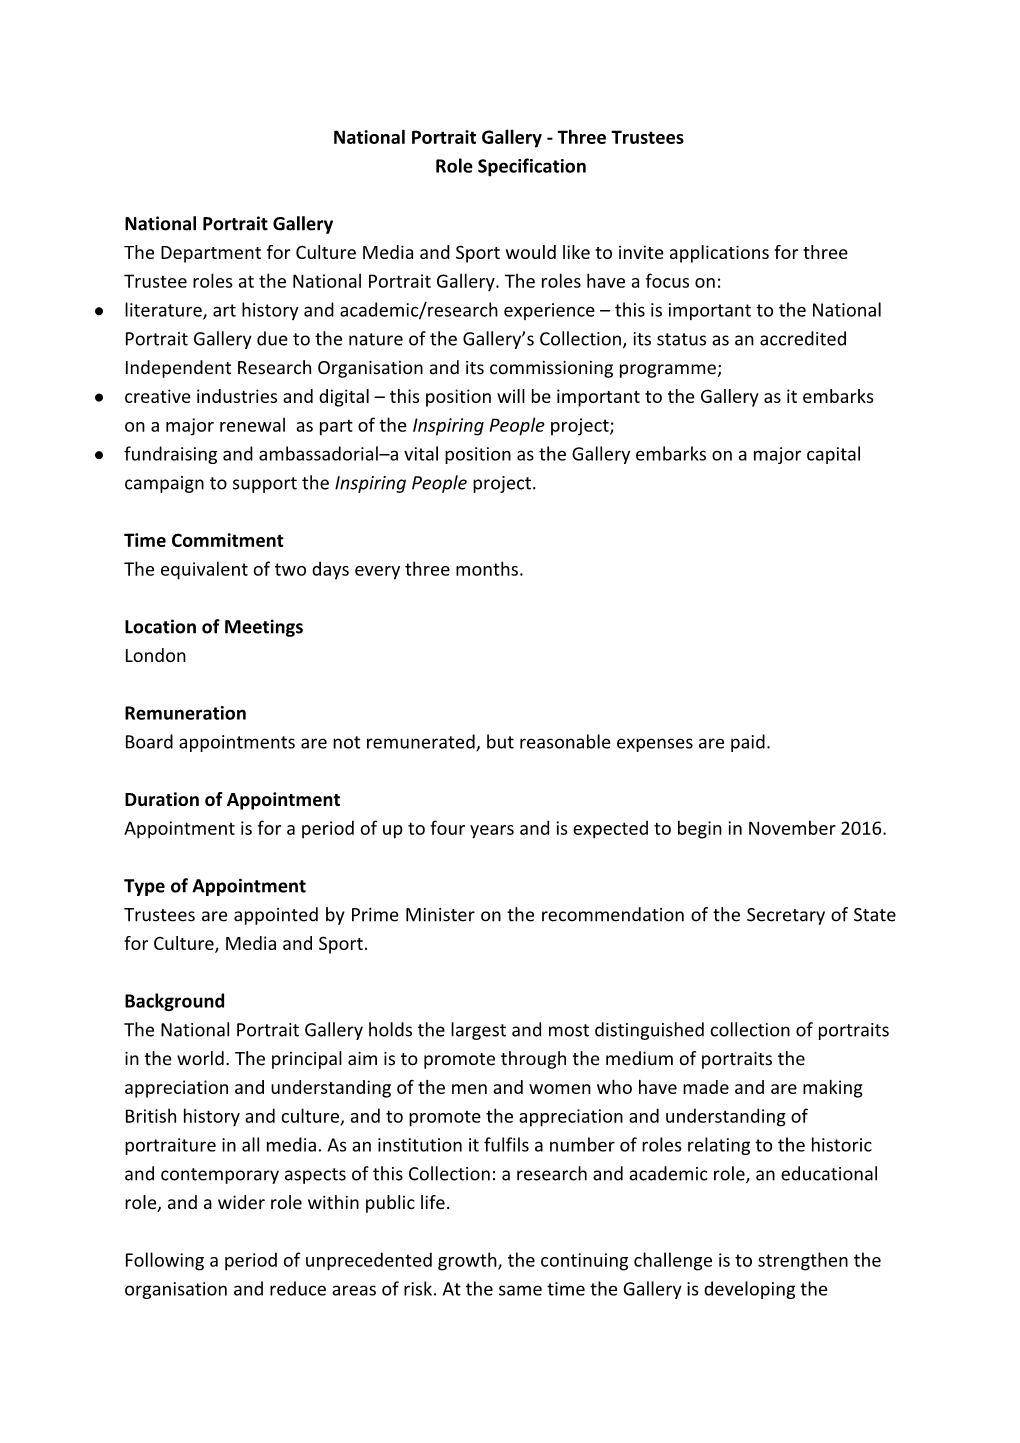 National Portrait Gallery - Three Trustees Role Specification